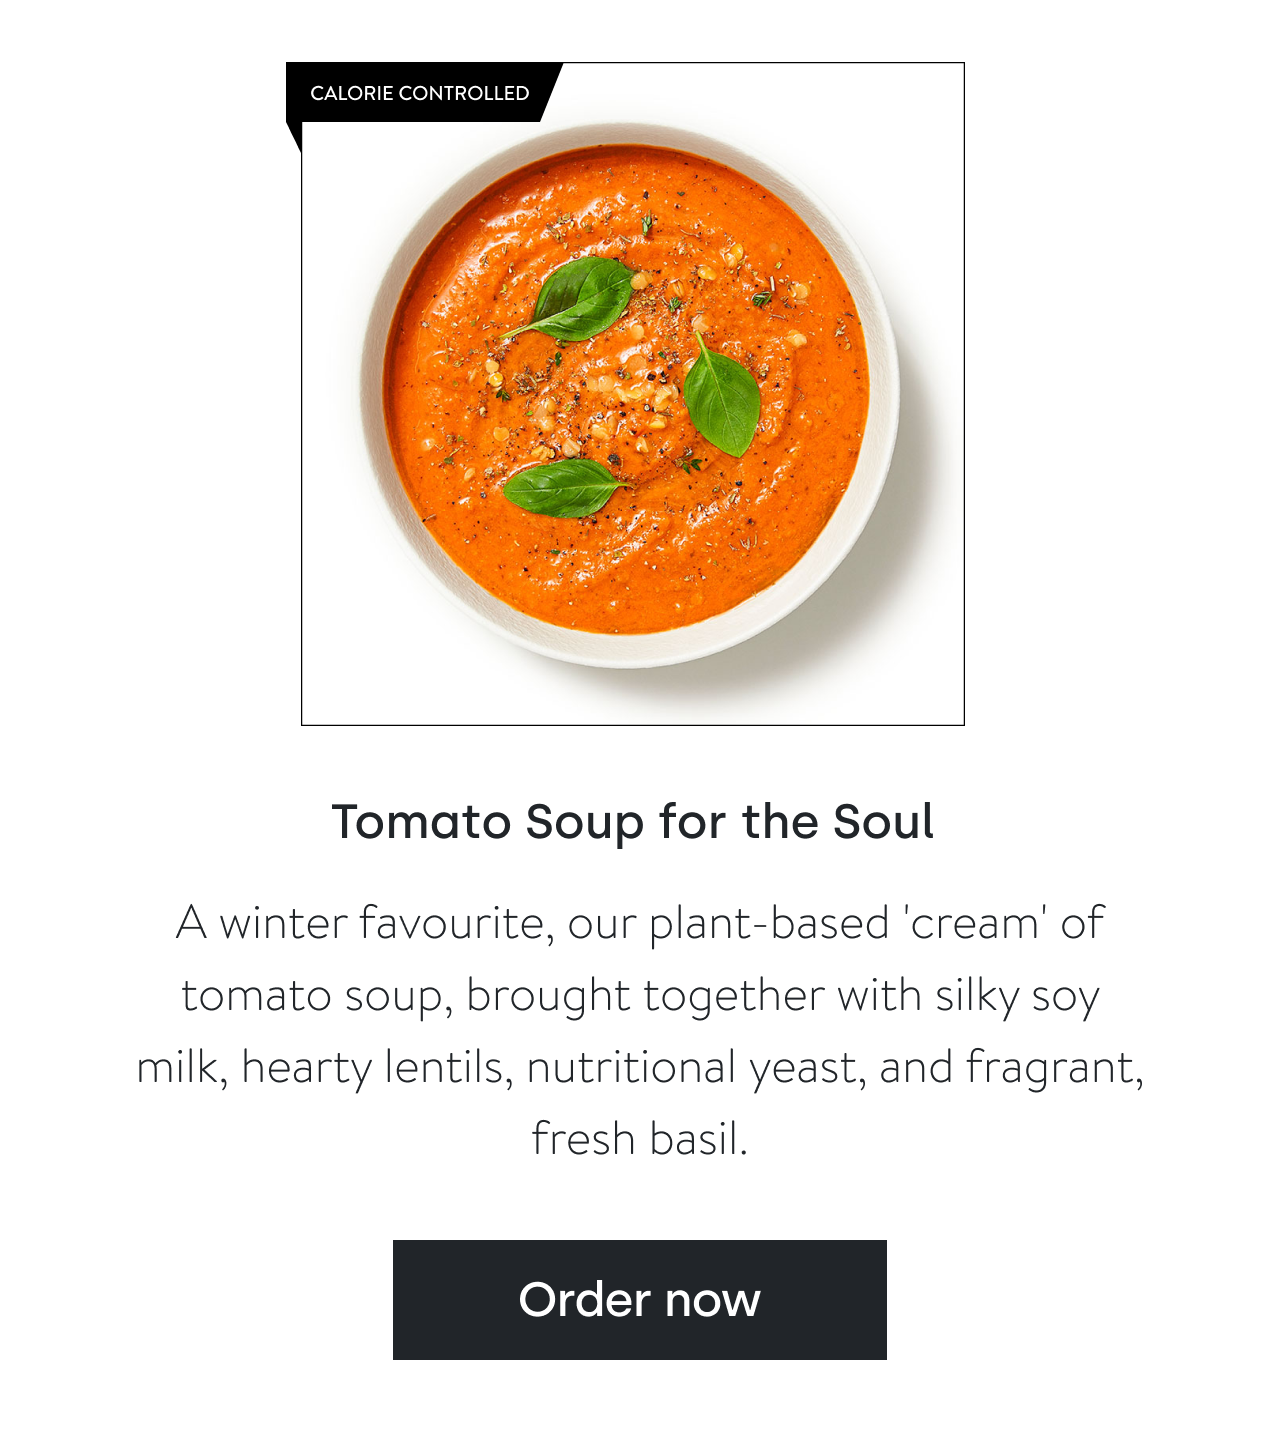 Tomato Soup for the Soul